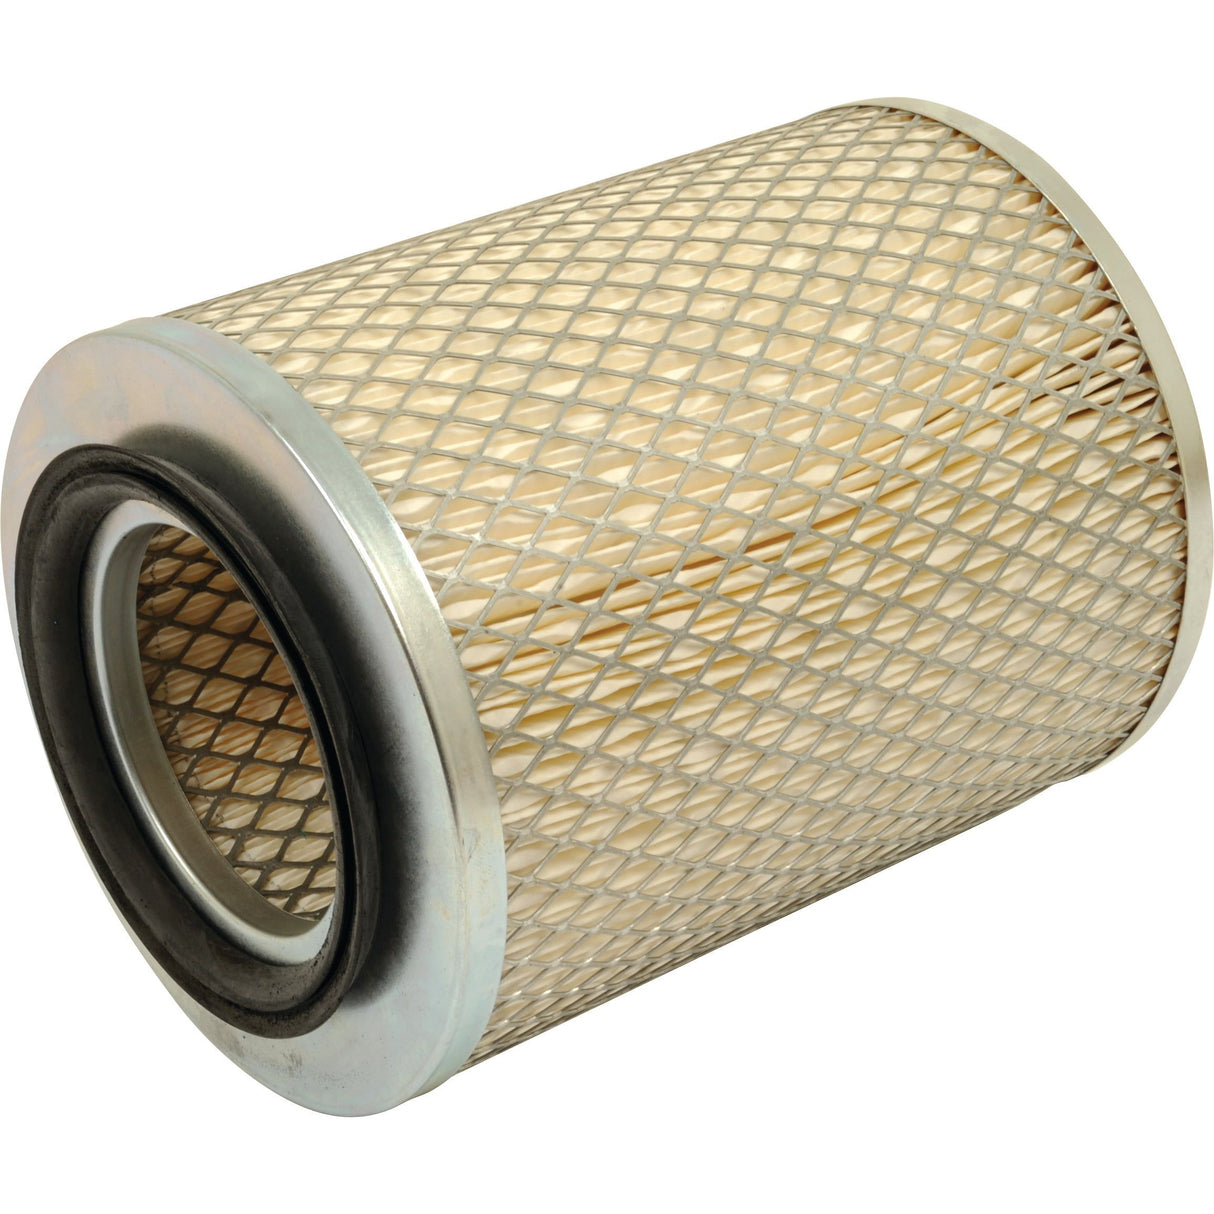 Air Filter - Outer - AF4137
 - S.108905 - Farming Parts